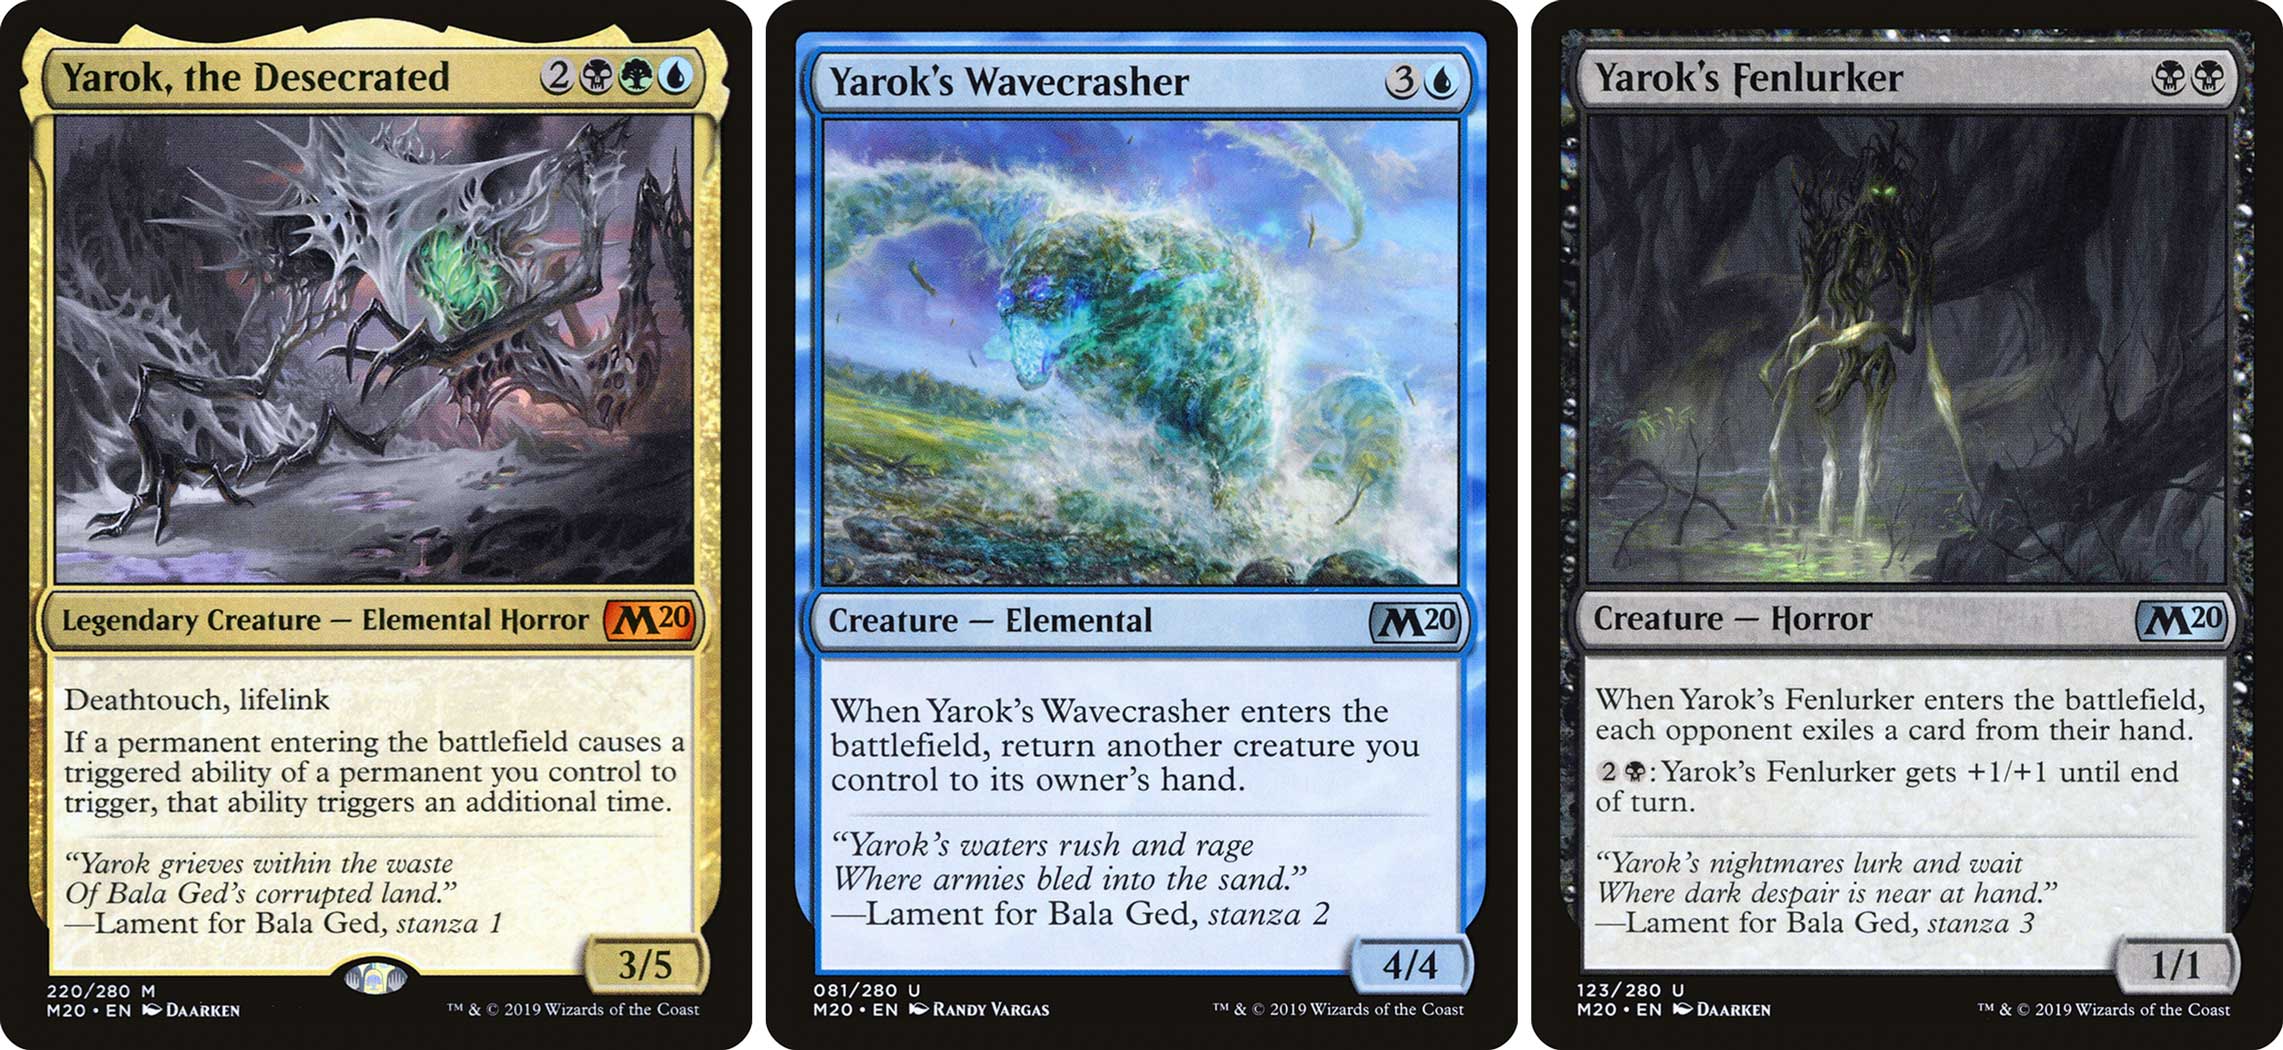 CARD IMAGES (all Core Set 2020): Yarok, the Desecrated; Yarok's Wavecrasher;